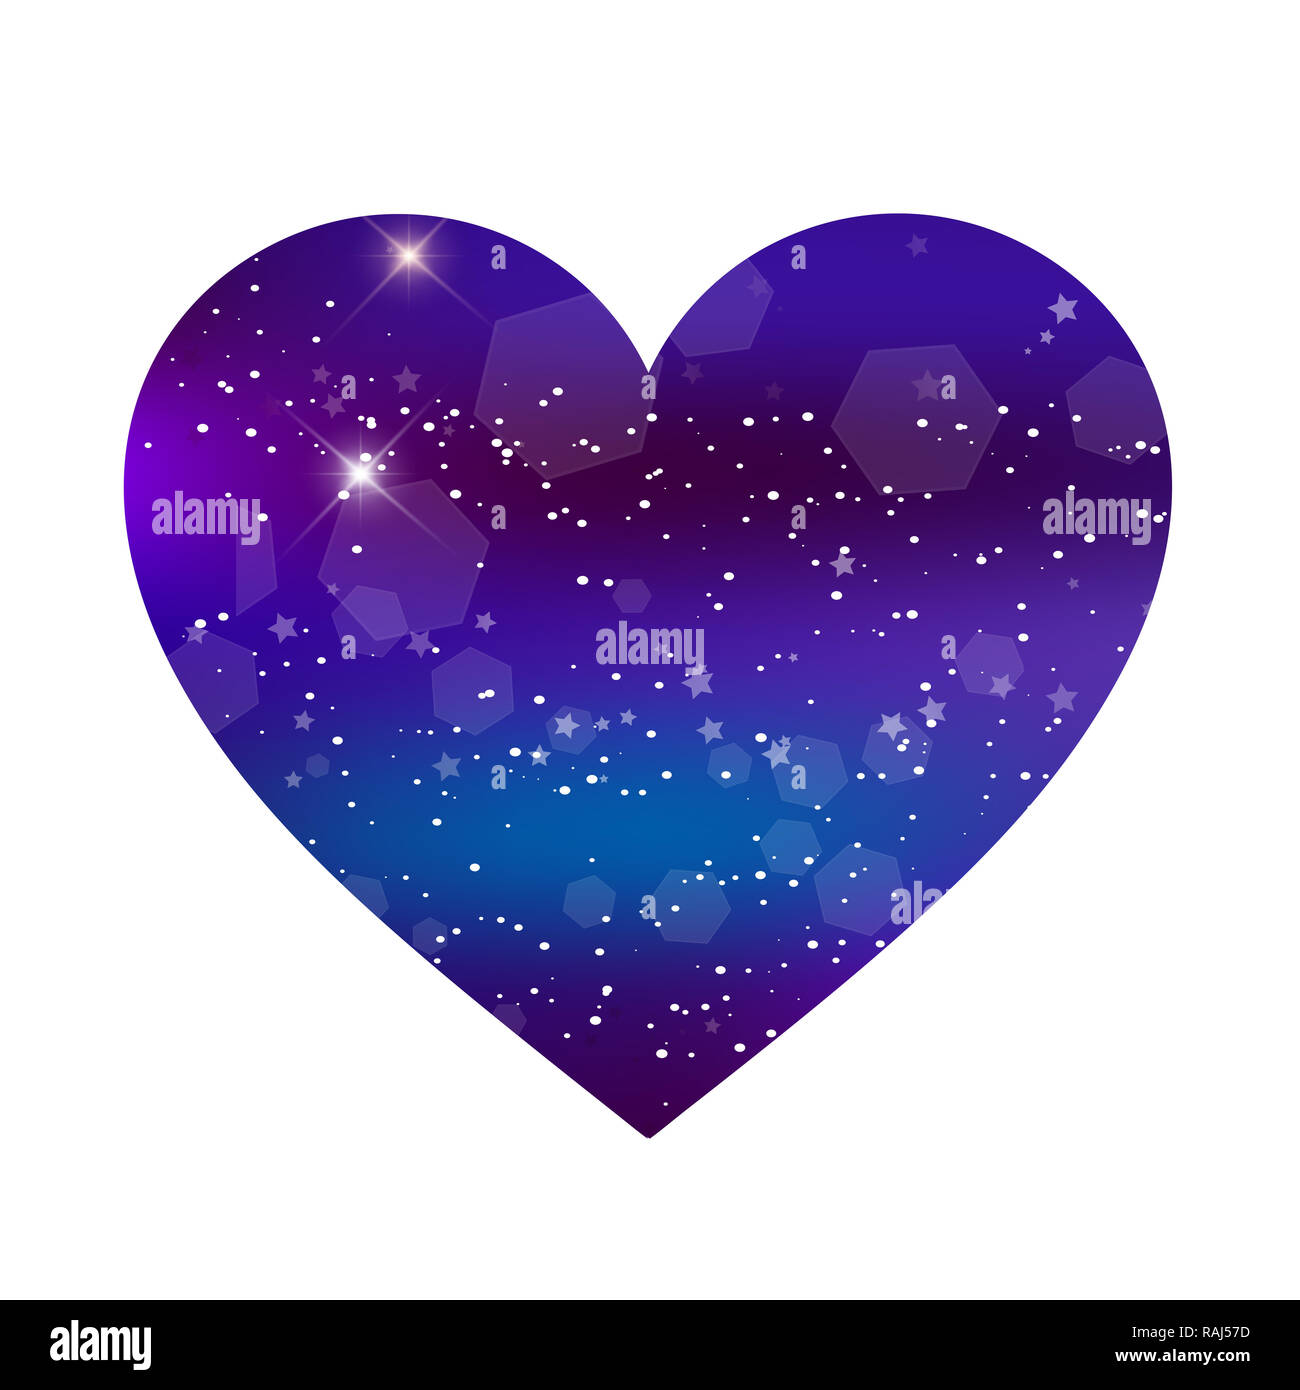 fantastic galaxy heart isolated on white background. Purple neon magic icon, night starry sky love symbol for valentine greeting card, wedding postcar Stock Photo